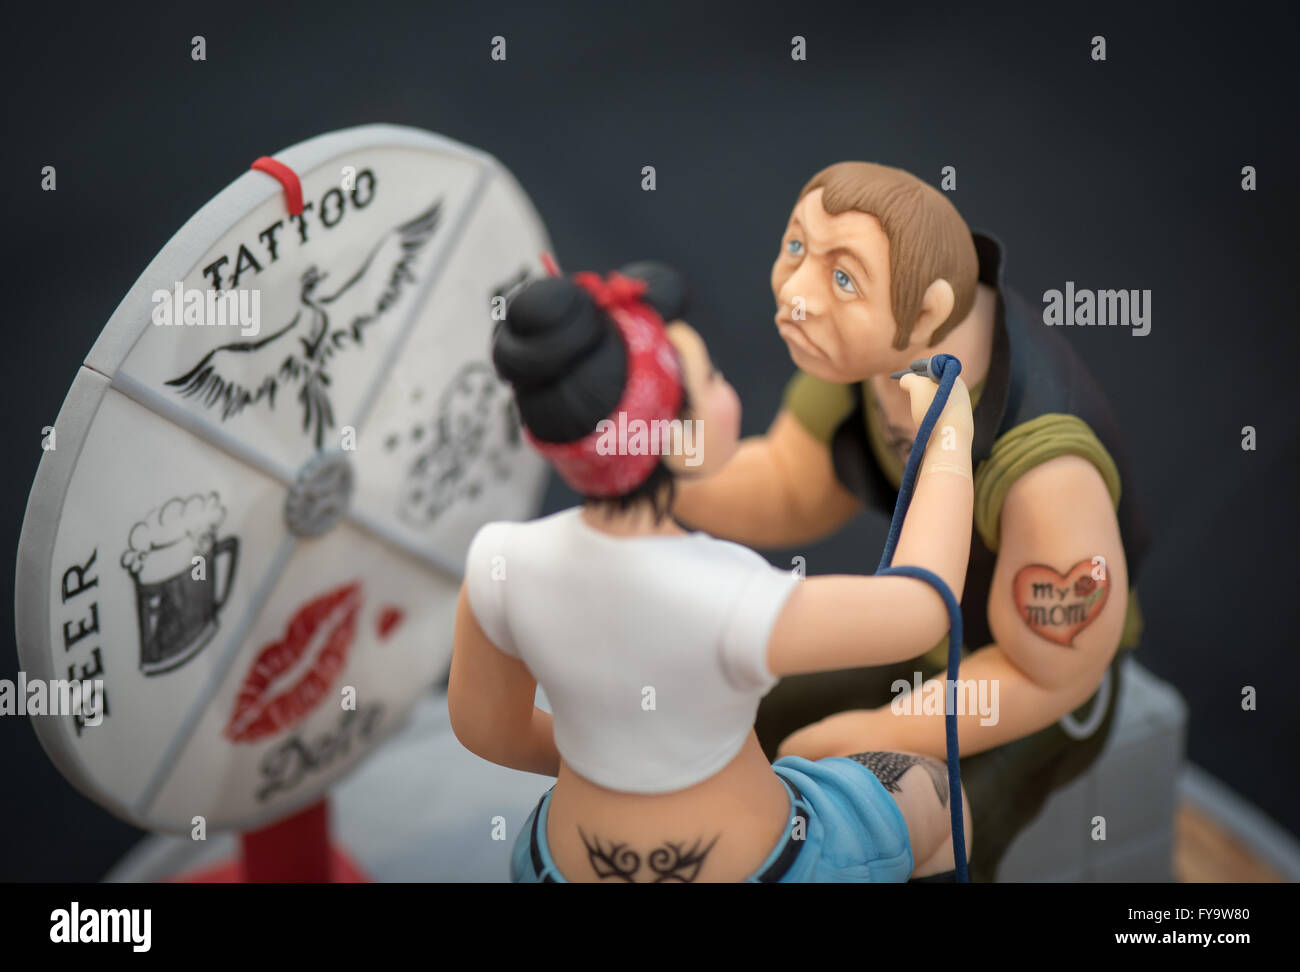 Tattoo studio woman and man cake decorations at Cake International – The Sugarcraft, Cake Decorating and Baking Show in London Stock Photo